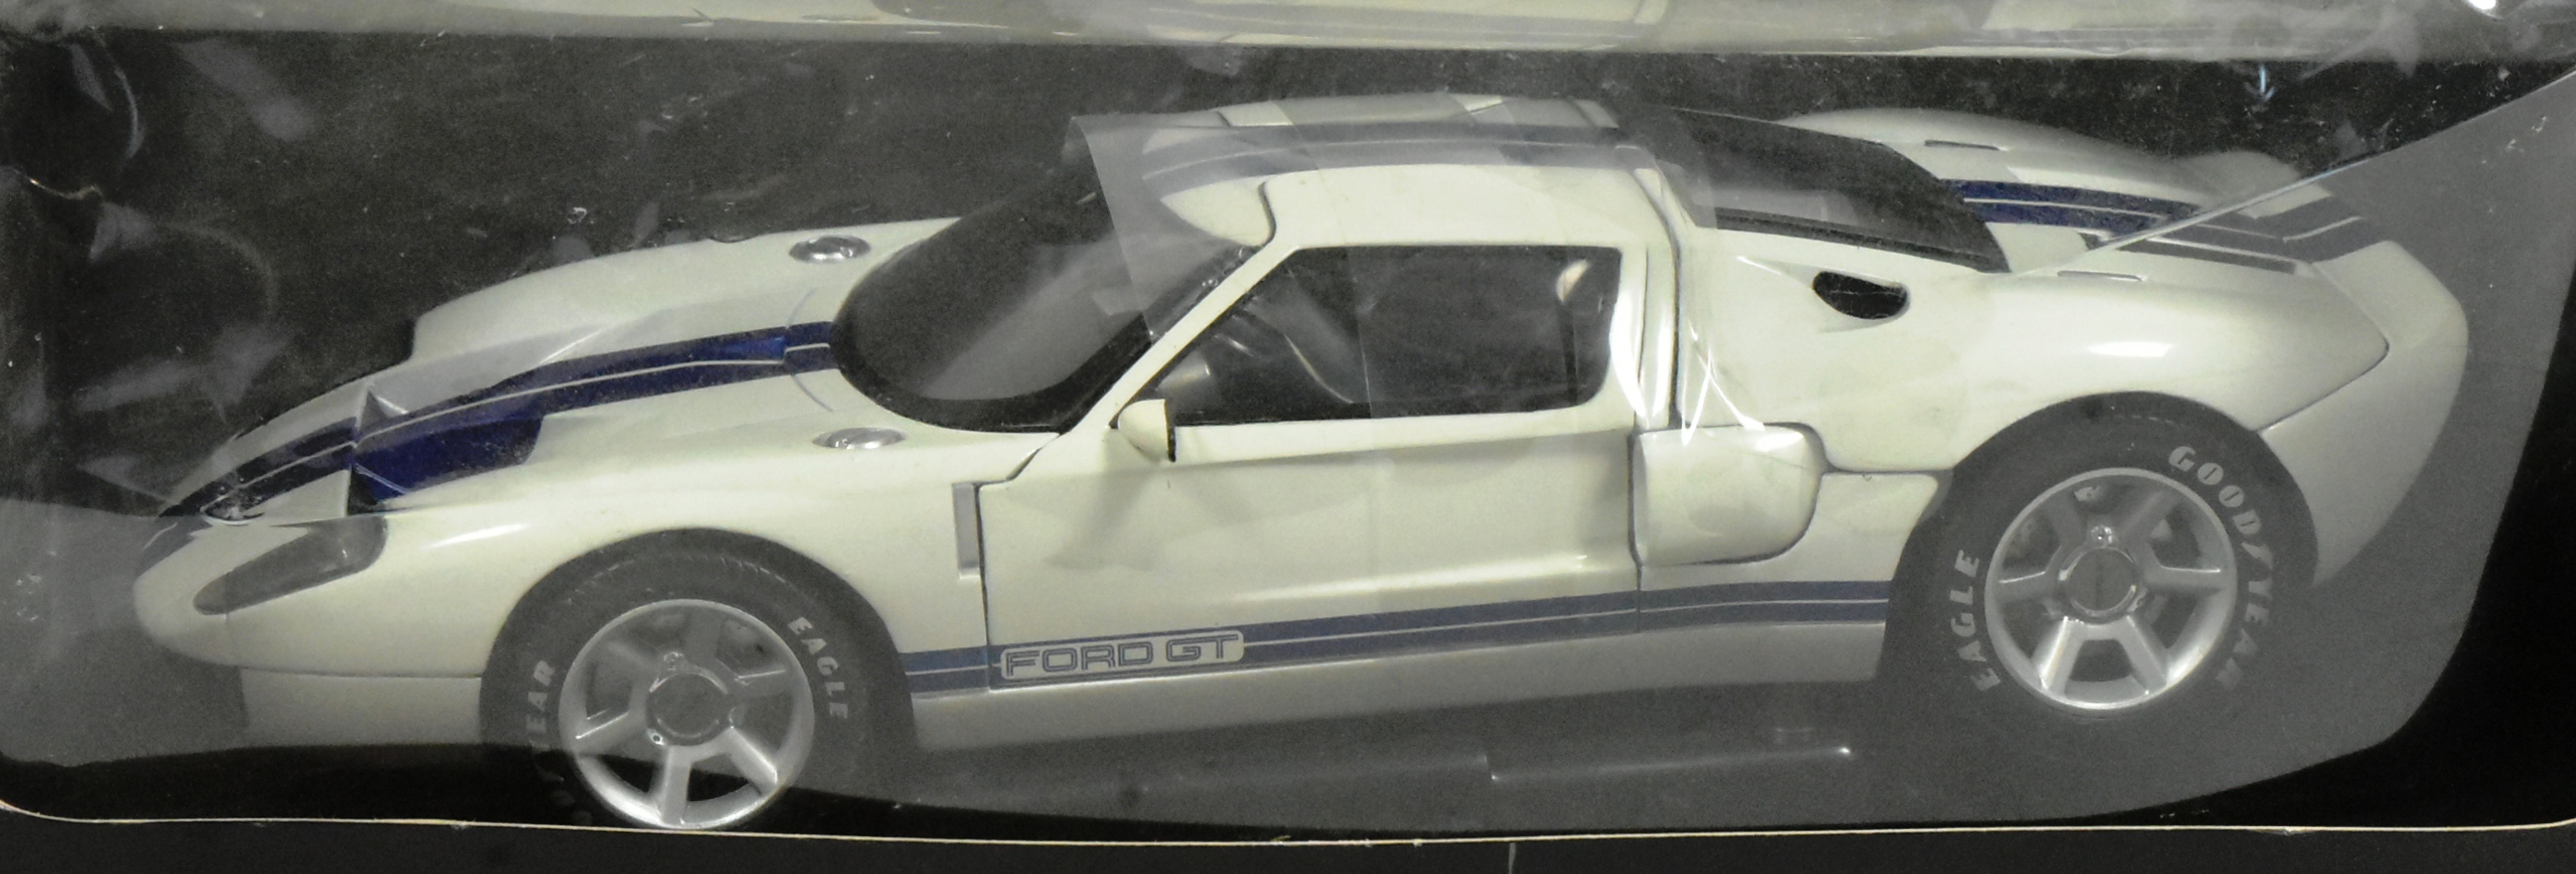 DIECAST - 1/18 SCALE FORD GT CONCEPT CAR - Image 2 of 4